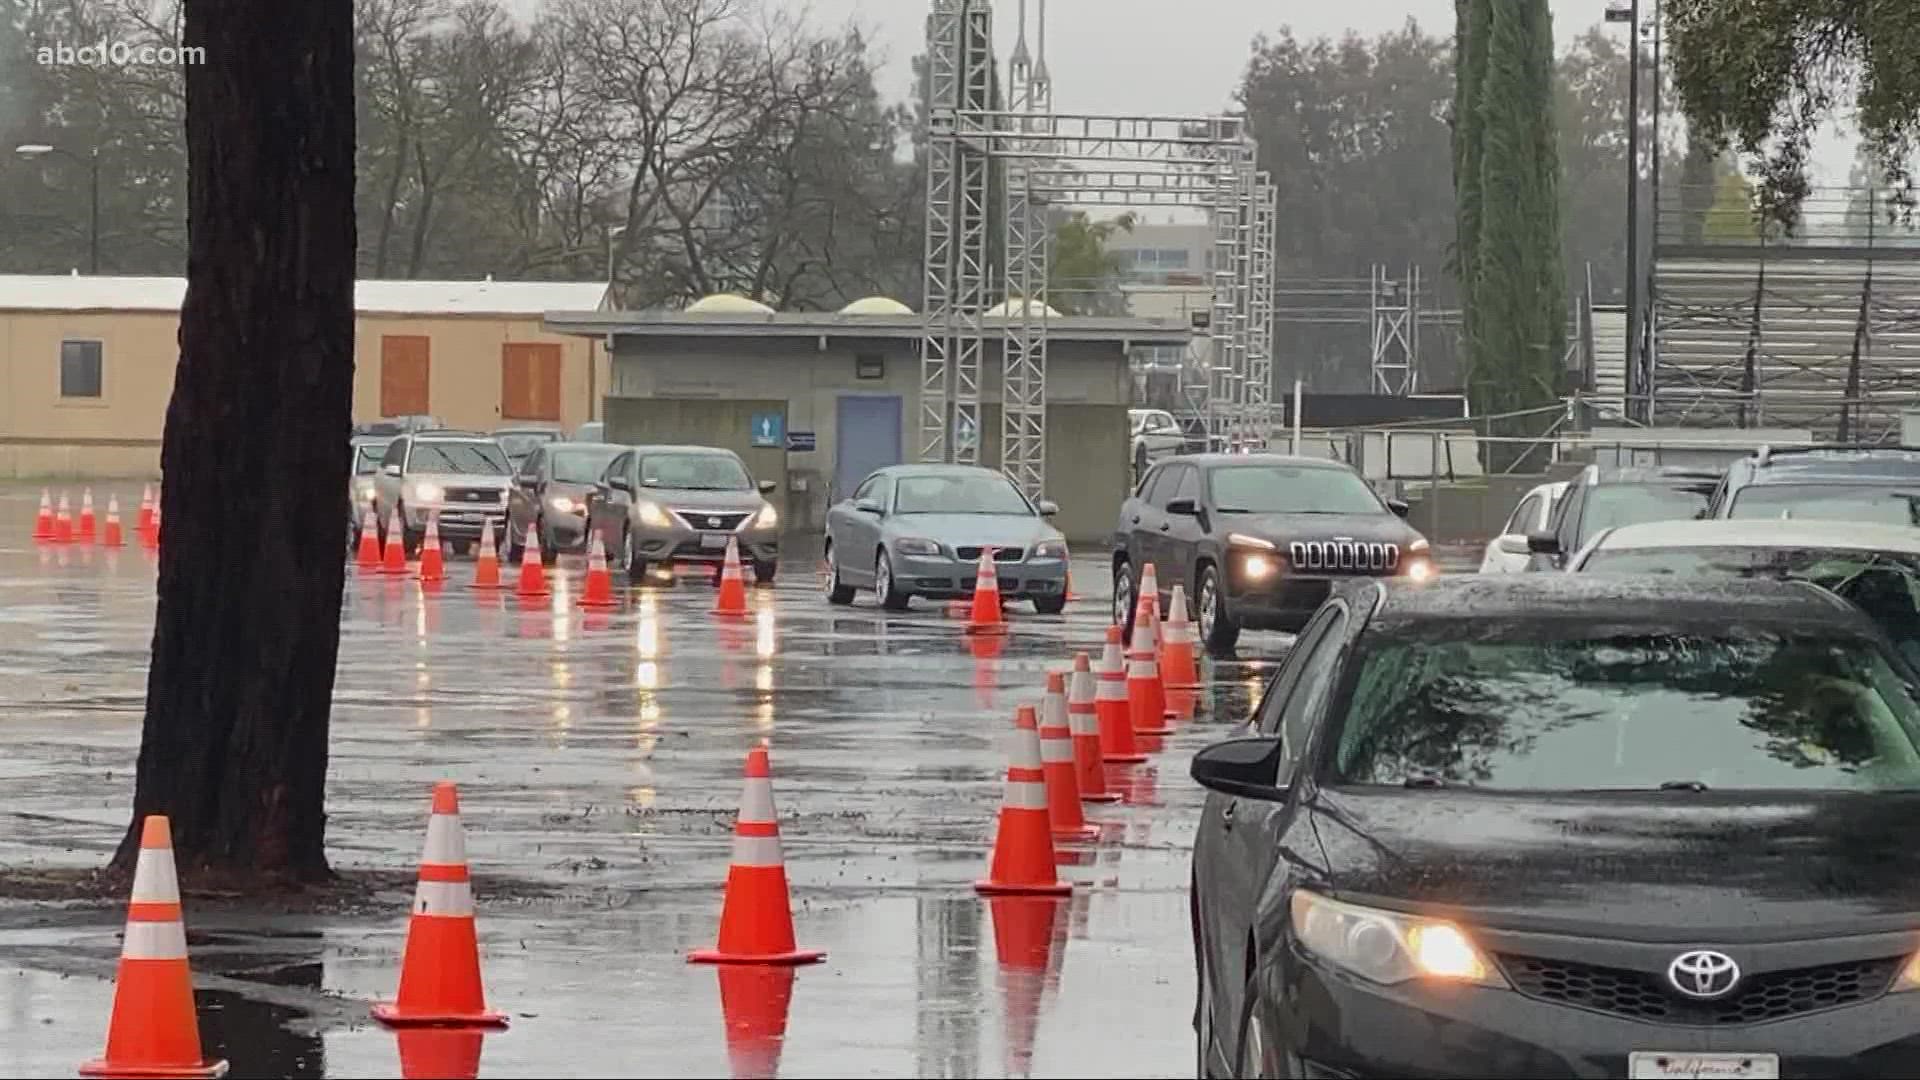 As the demand for COVID-19 testing has increased 300% in the last two weeks, Sacramento residents are facing long lines at testing locations.